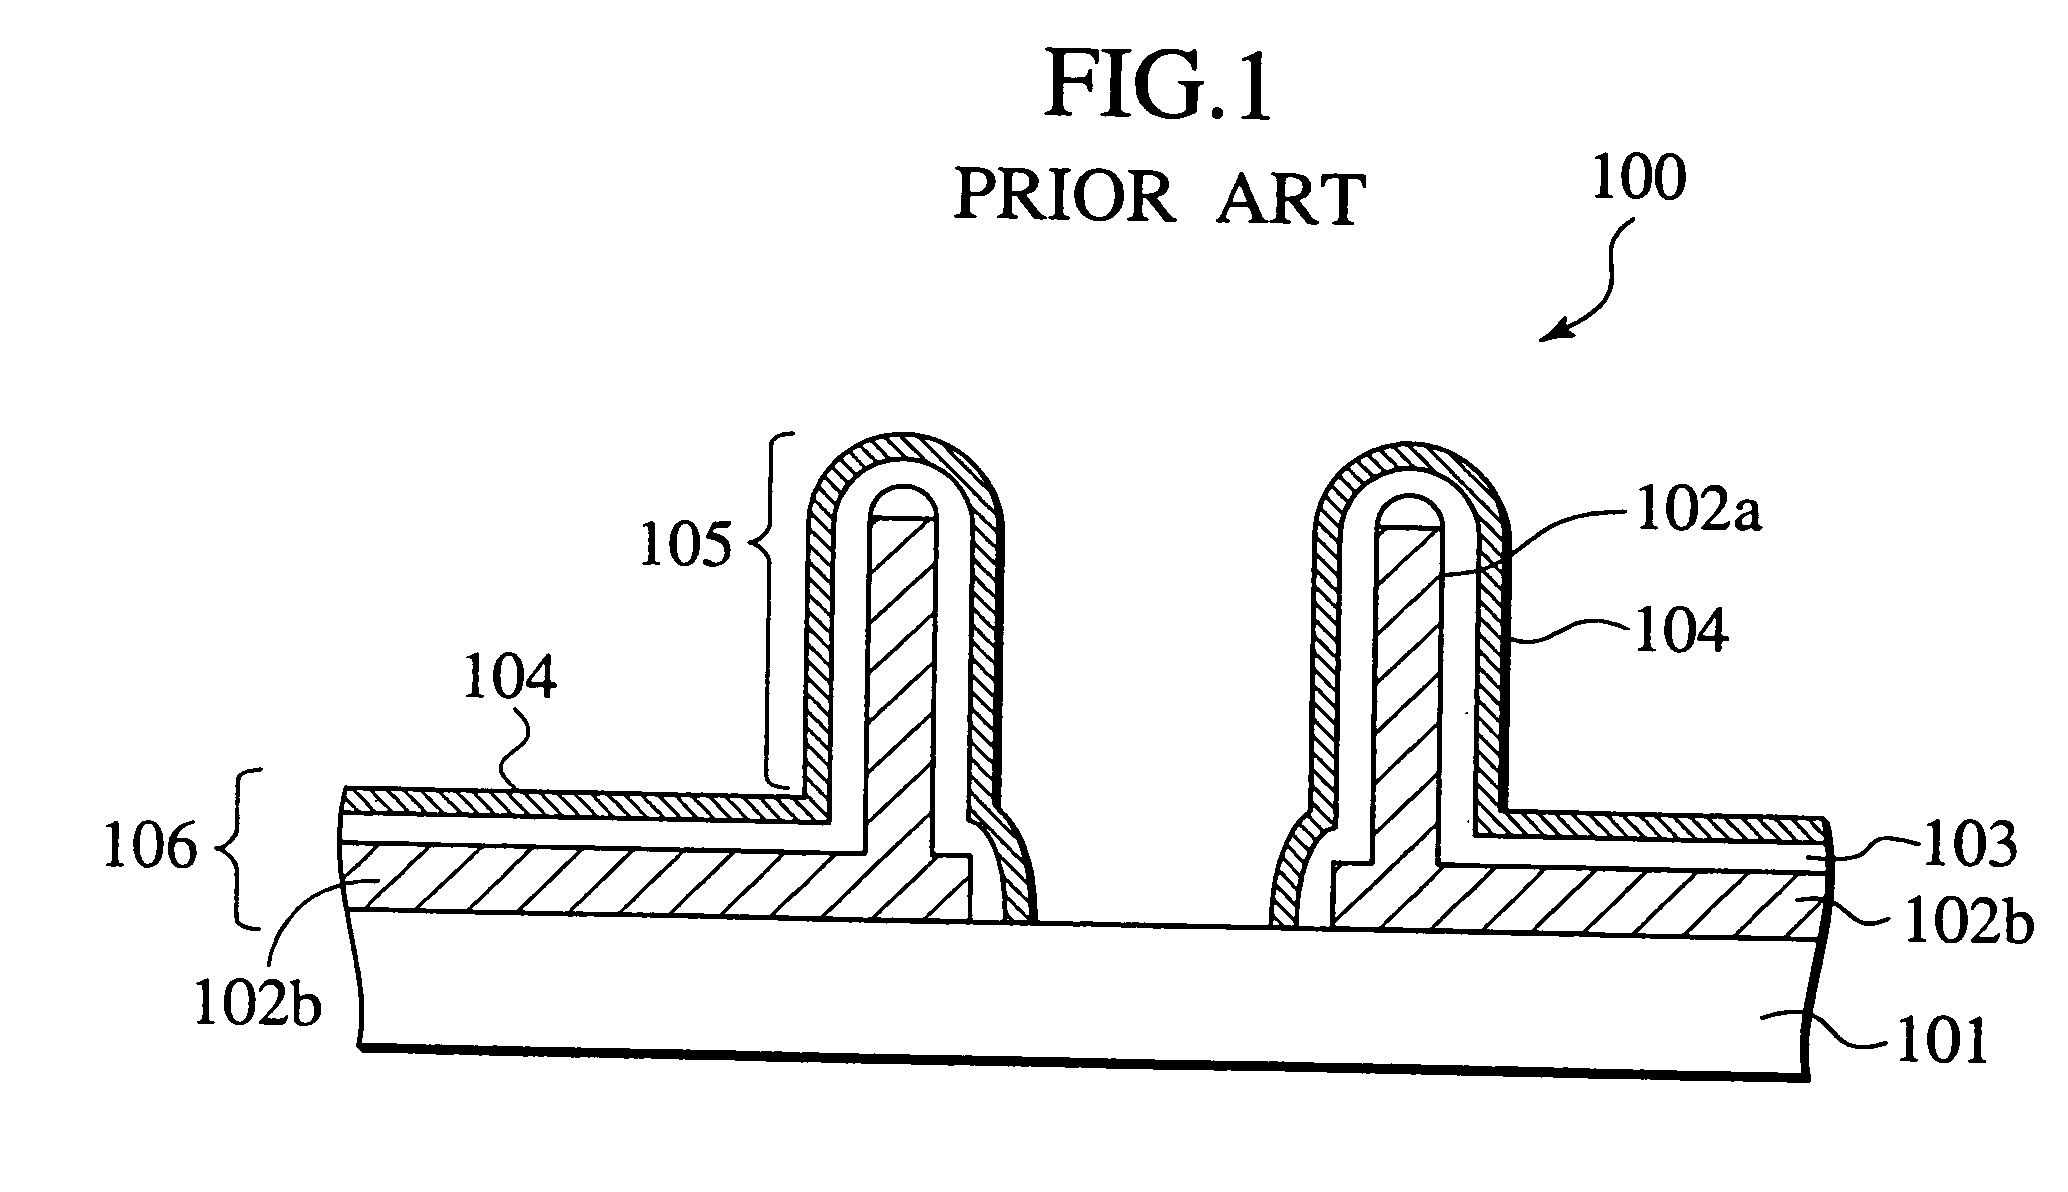 Method for fabricating a probe pin for testing electrical characteristics of an apparatus